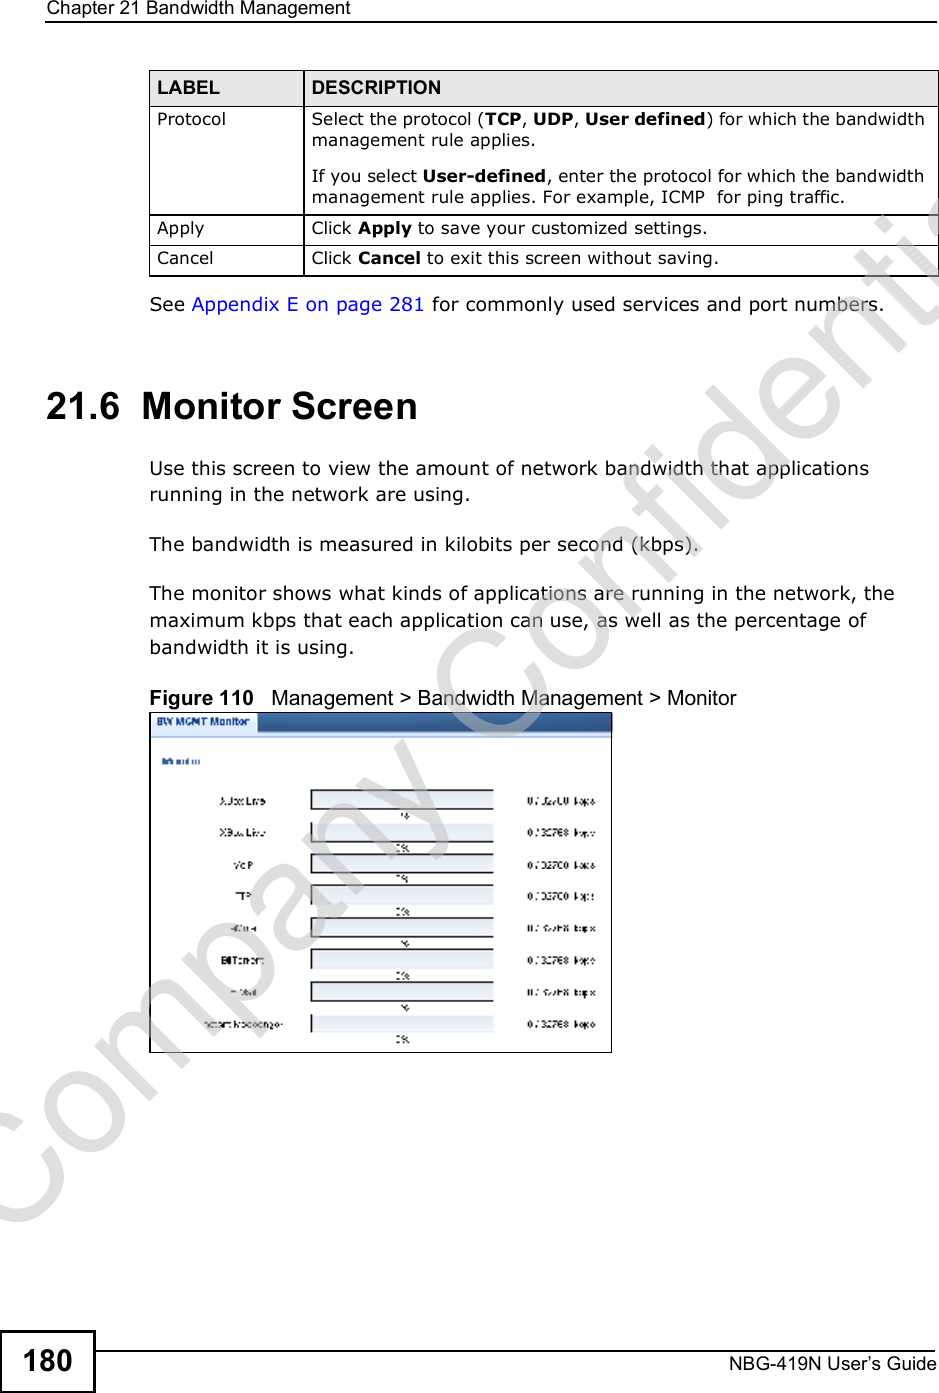 Chapter 21Bandwidth ManagementNBG-419N User s Guide180See Appendix E on page 281 for commonly used services and port numbers.21.6  Monitor ScreenUse this screen to view the amount of network bandwidth that applications running in the network are using.The bandwidth is measured in kilobits per second (kbps). The monitor shows what kinds of applications are running in the network, the maximum kbps that each application can use, as well as the percentage of bandwidth it is using. Figure 110   Management &gt; Bandwidth Management &gt; MonitorProtocol Select the protocol (TCP, UDP, User defined) for which the bandwidth management rule applies. If you select User-defined, enter the protocol for which the bandwidth management rule applies. For example, ICMP  for ping traffic.Apply Click Apply to save your customized settings.Cancel Click Cancel to exit this screen without saving.LABEL DESCRIPTIONCompany Confidential